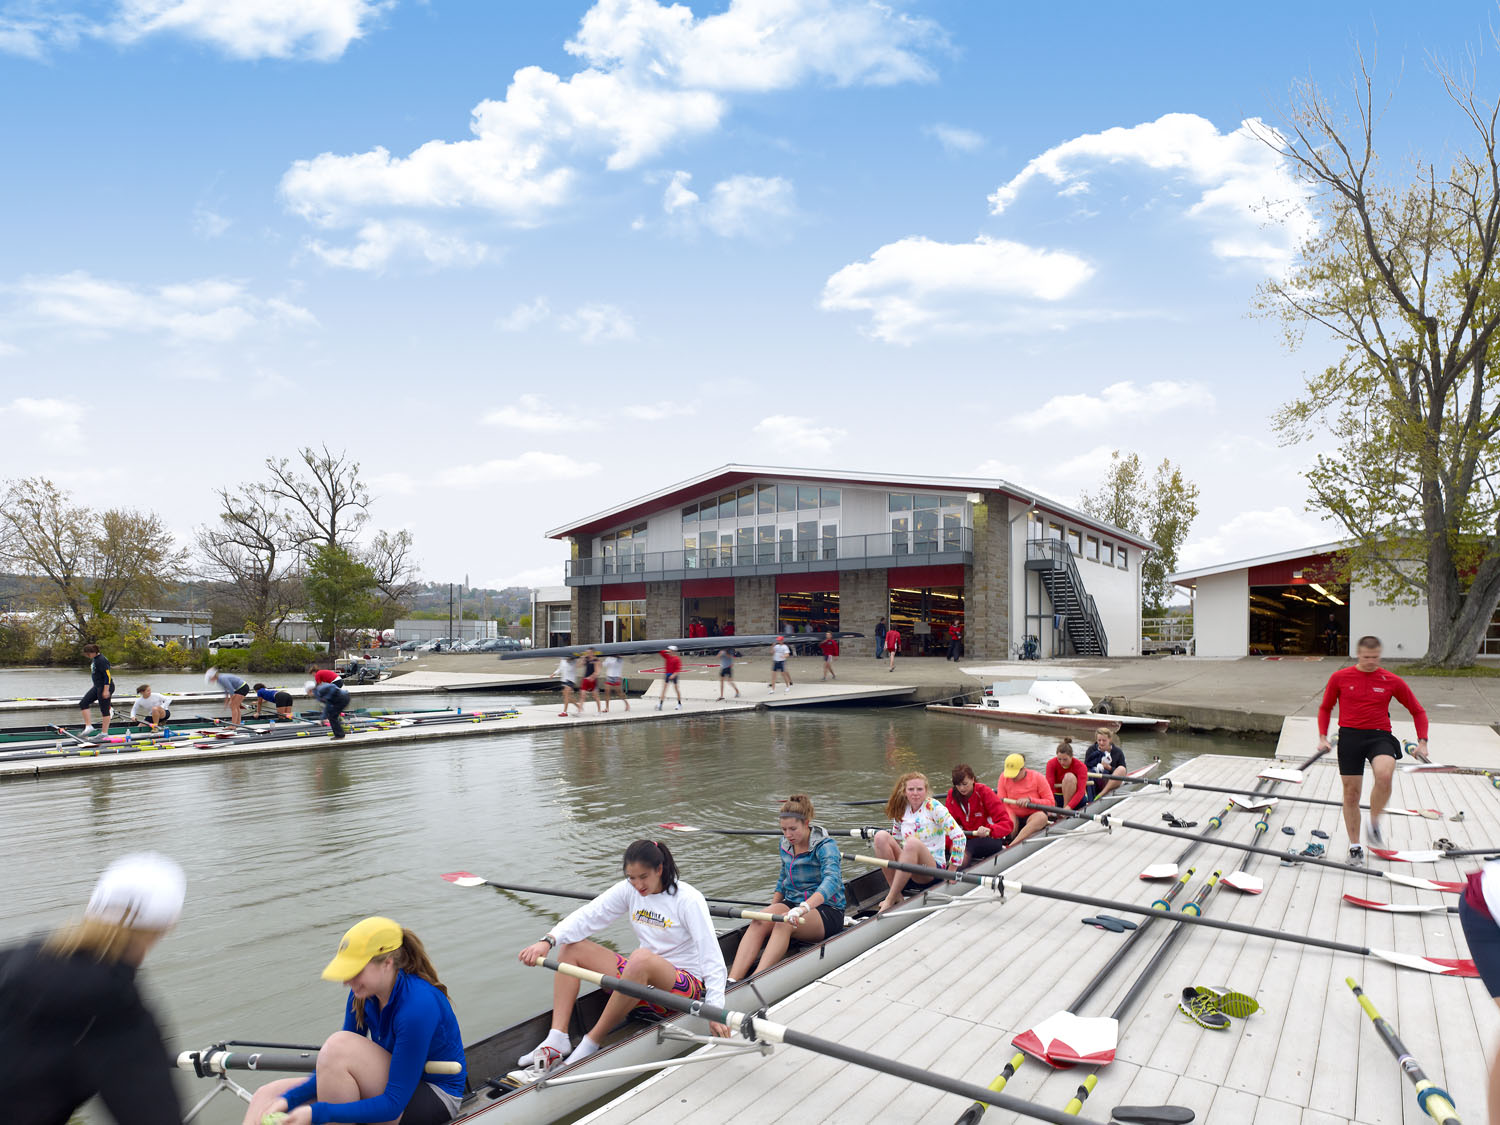 Cornell University rowing has been transformed into a waterfront campus destination. Photo courtesy HGA